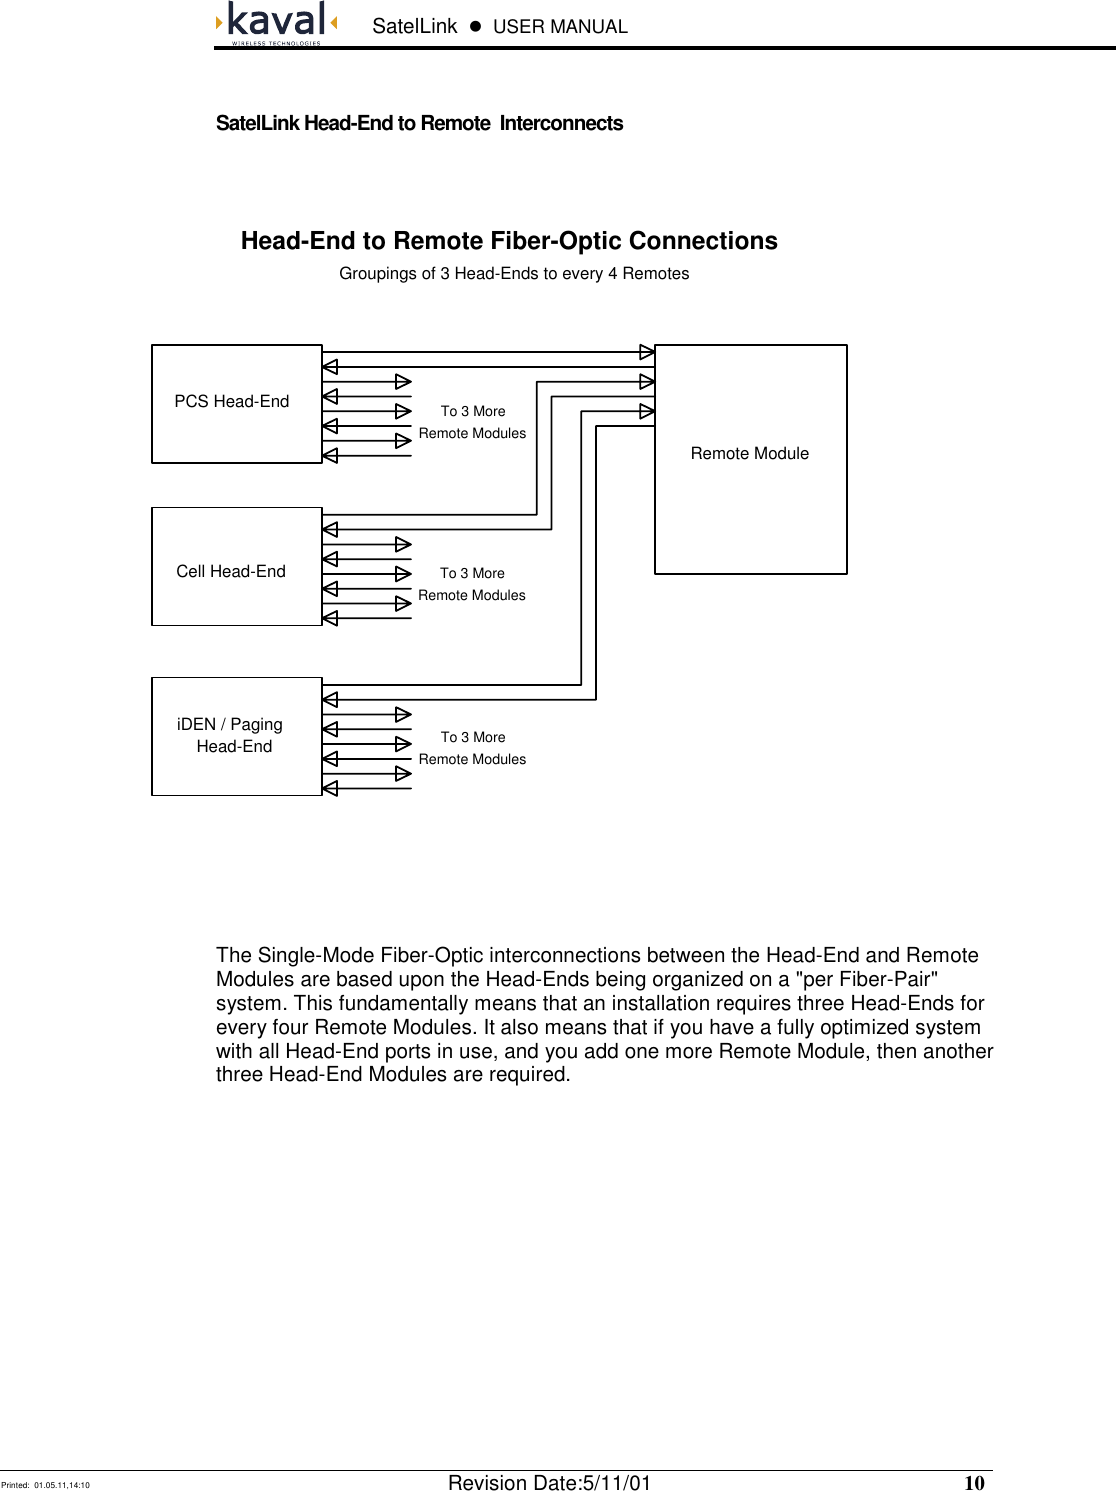  SatelLink  !  USER MANUAL   Printed:  01.05.11,14:10  Revision Date:5/11/01   10    SatelLink Head-End to Remote  Interconnects   The Single-Mode Fiber-Optic interconnections between the Head-End and Remote Modules are based upon the Head-Ends being organized on a &quot;per Fiber-Pair&quot; system. This fundamentally means that an installation requires three Head-Ends for every four Remote Modules. It also means that if you have a fully optimized system with all Head-End ports in use, and you add one more Remote Module, then another three Head-End Modules are required. Head-End to Remote Fiber-Optic ConnectionsGroupings of 3 Head-Ends to every 4 RemotesPCS Head-EndCell Head-EndHead-EndiDEN / PagingRemote ModuleRemote ModulesTo 3 MoreRemote ModulesTo 3 MoreRemote ModulesTo 3 More